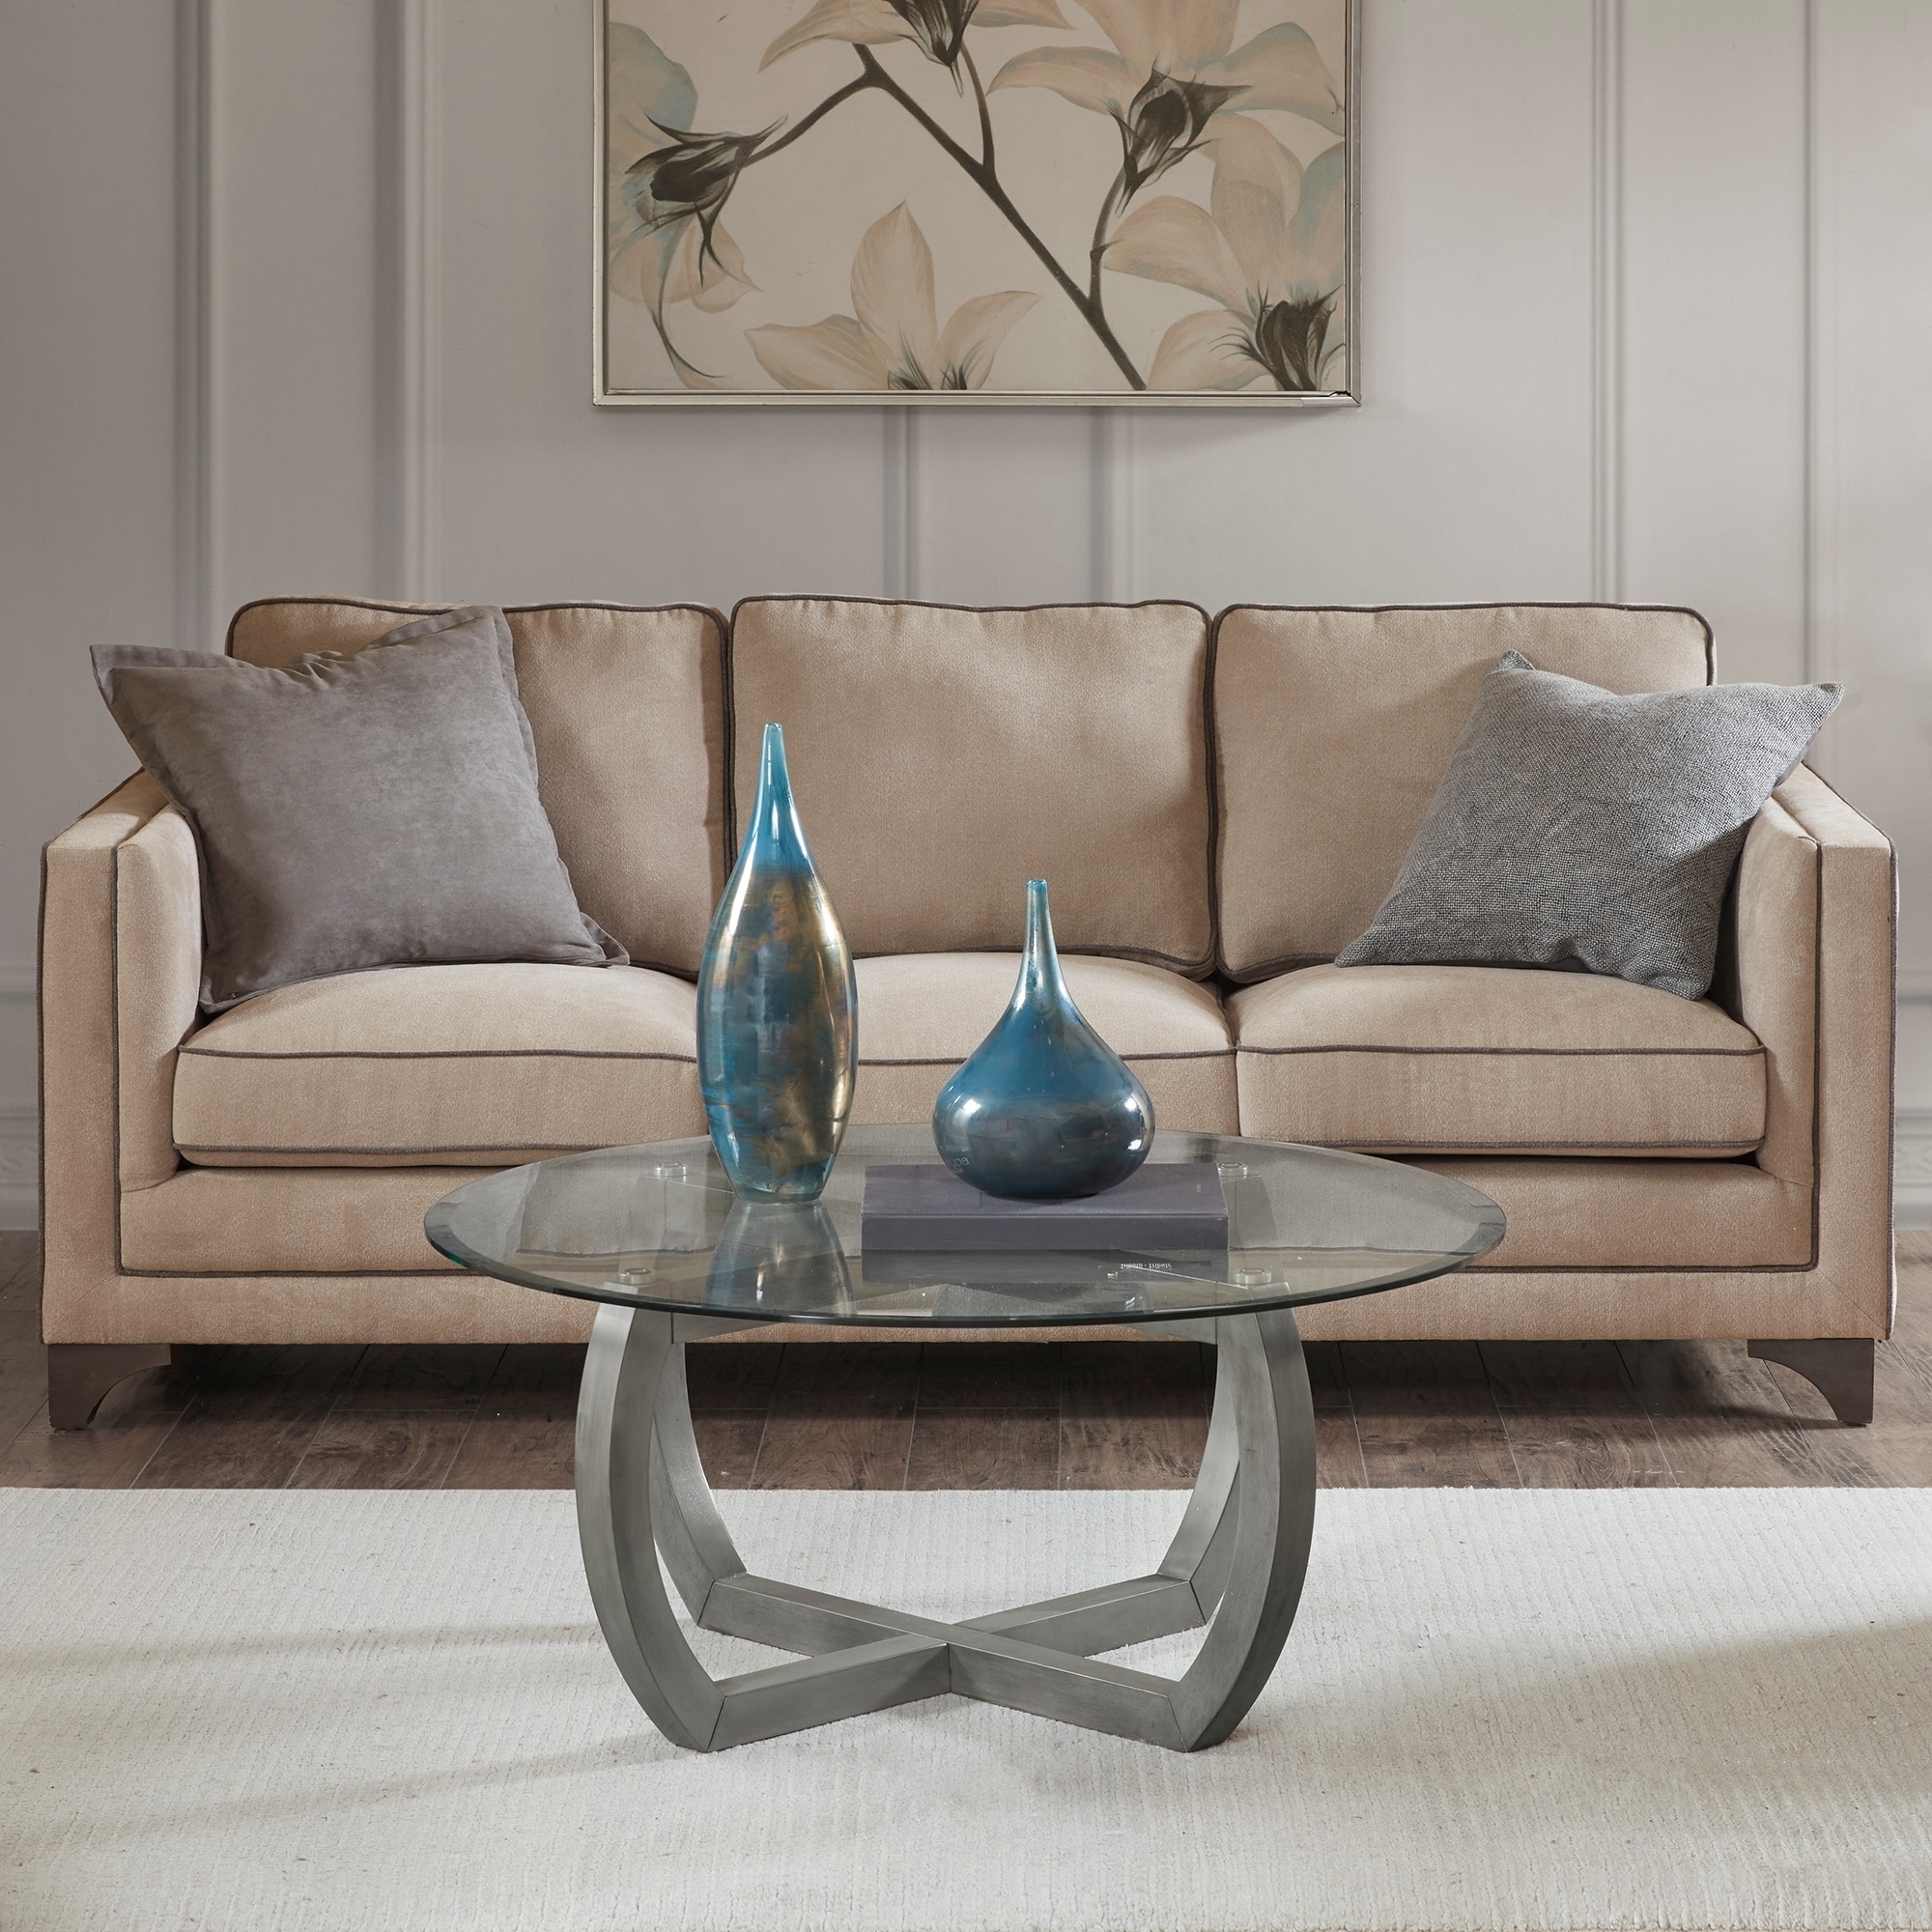 Shop Madison Park Signature Nob Hill Grey Coffee Table Overstock